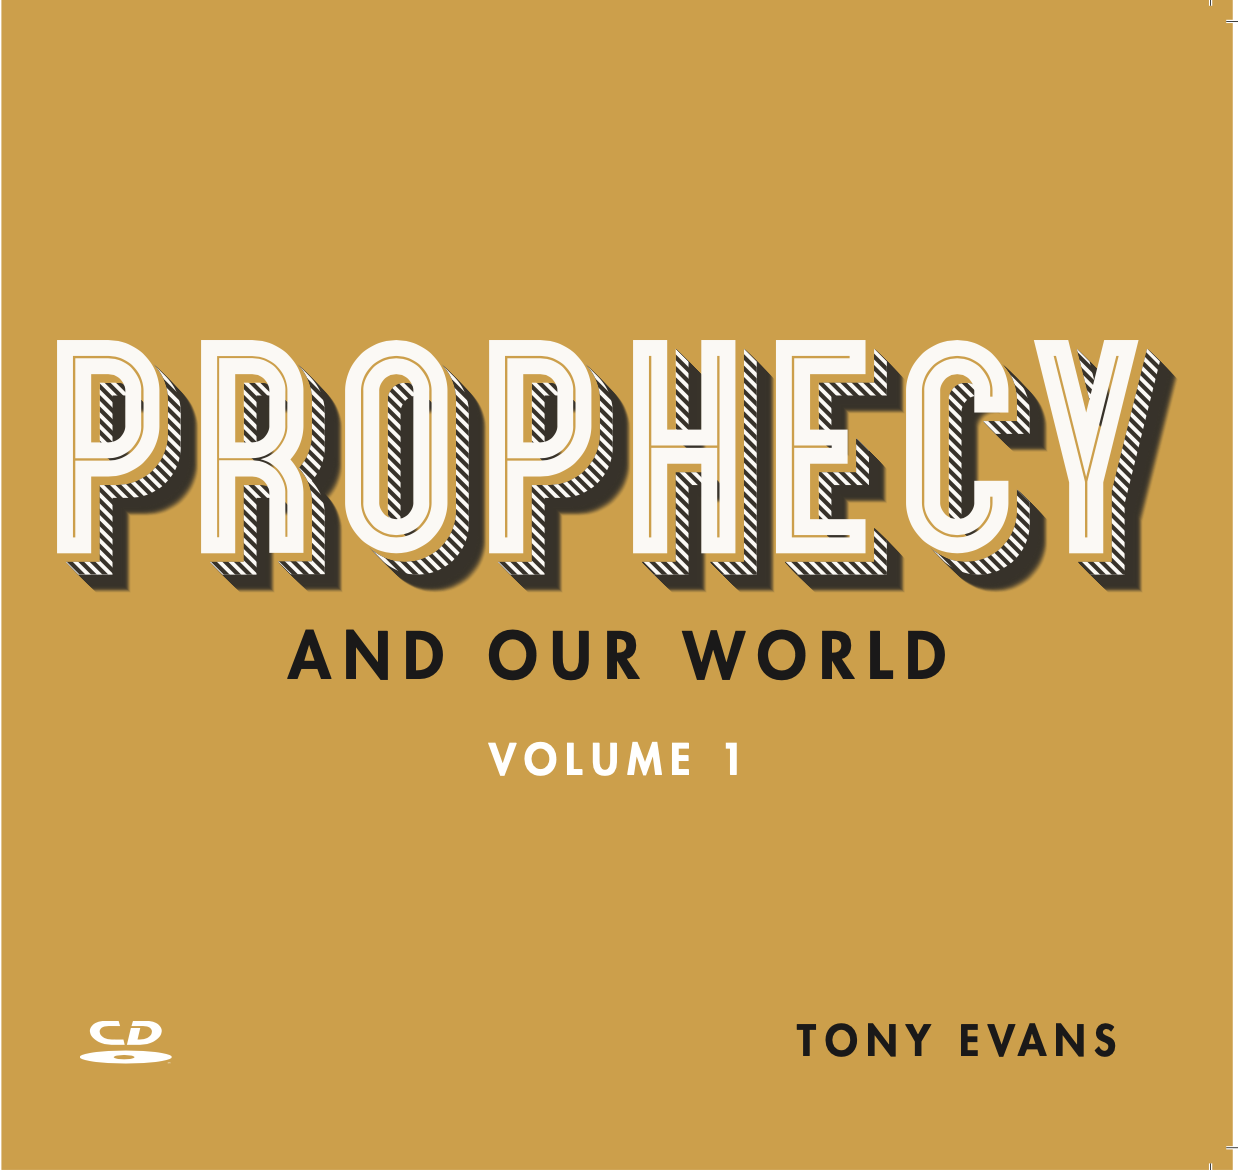 Rapture of the Church (Prophecy and Our World Vol 1 Series)